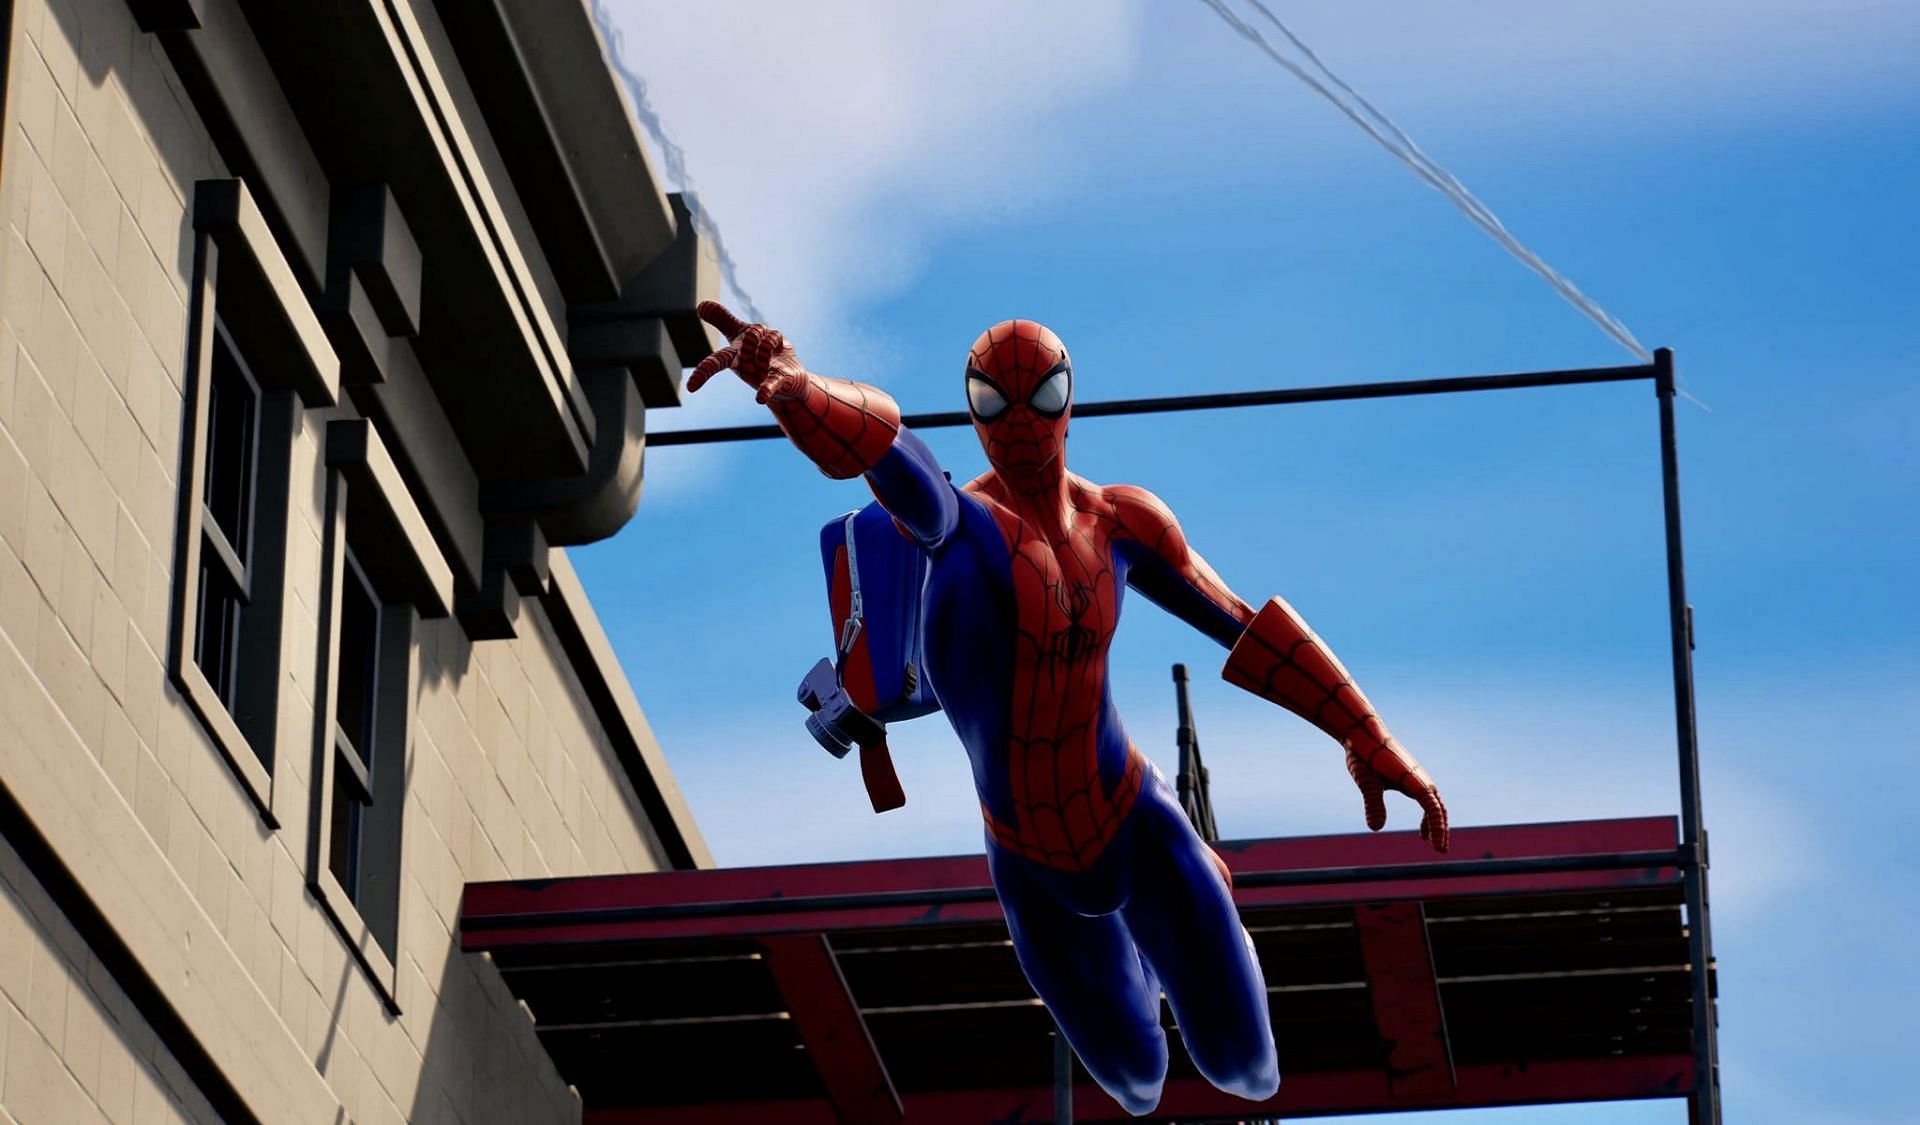 &quot;Lookout! Here comes Spider-Man!&quot; (Image via Twitter/axgreat8)